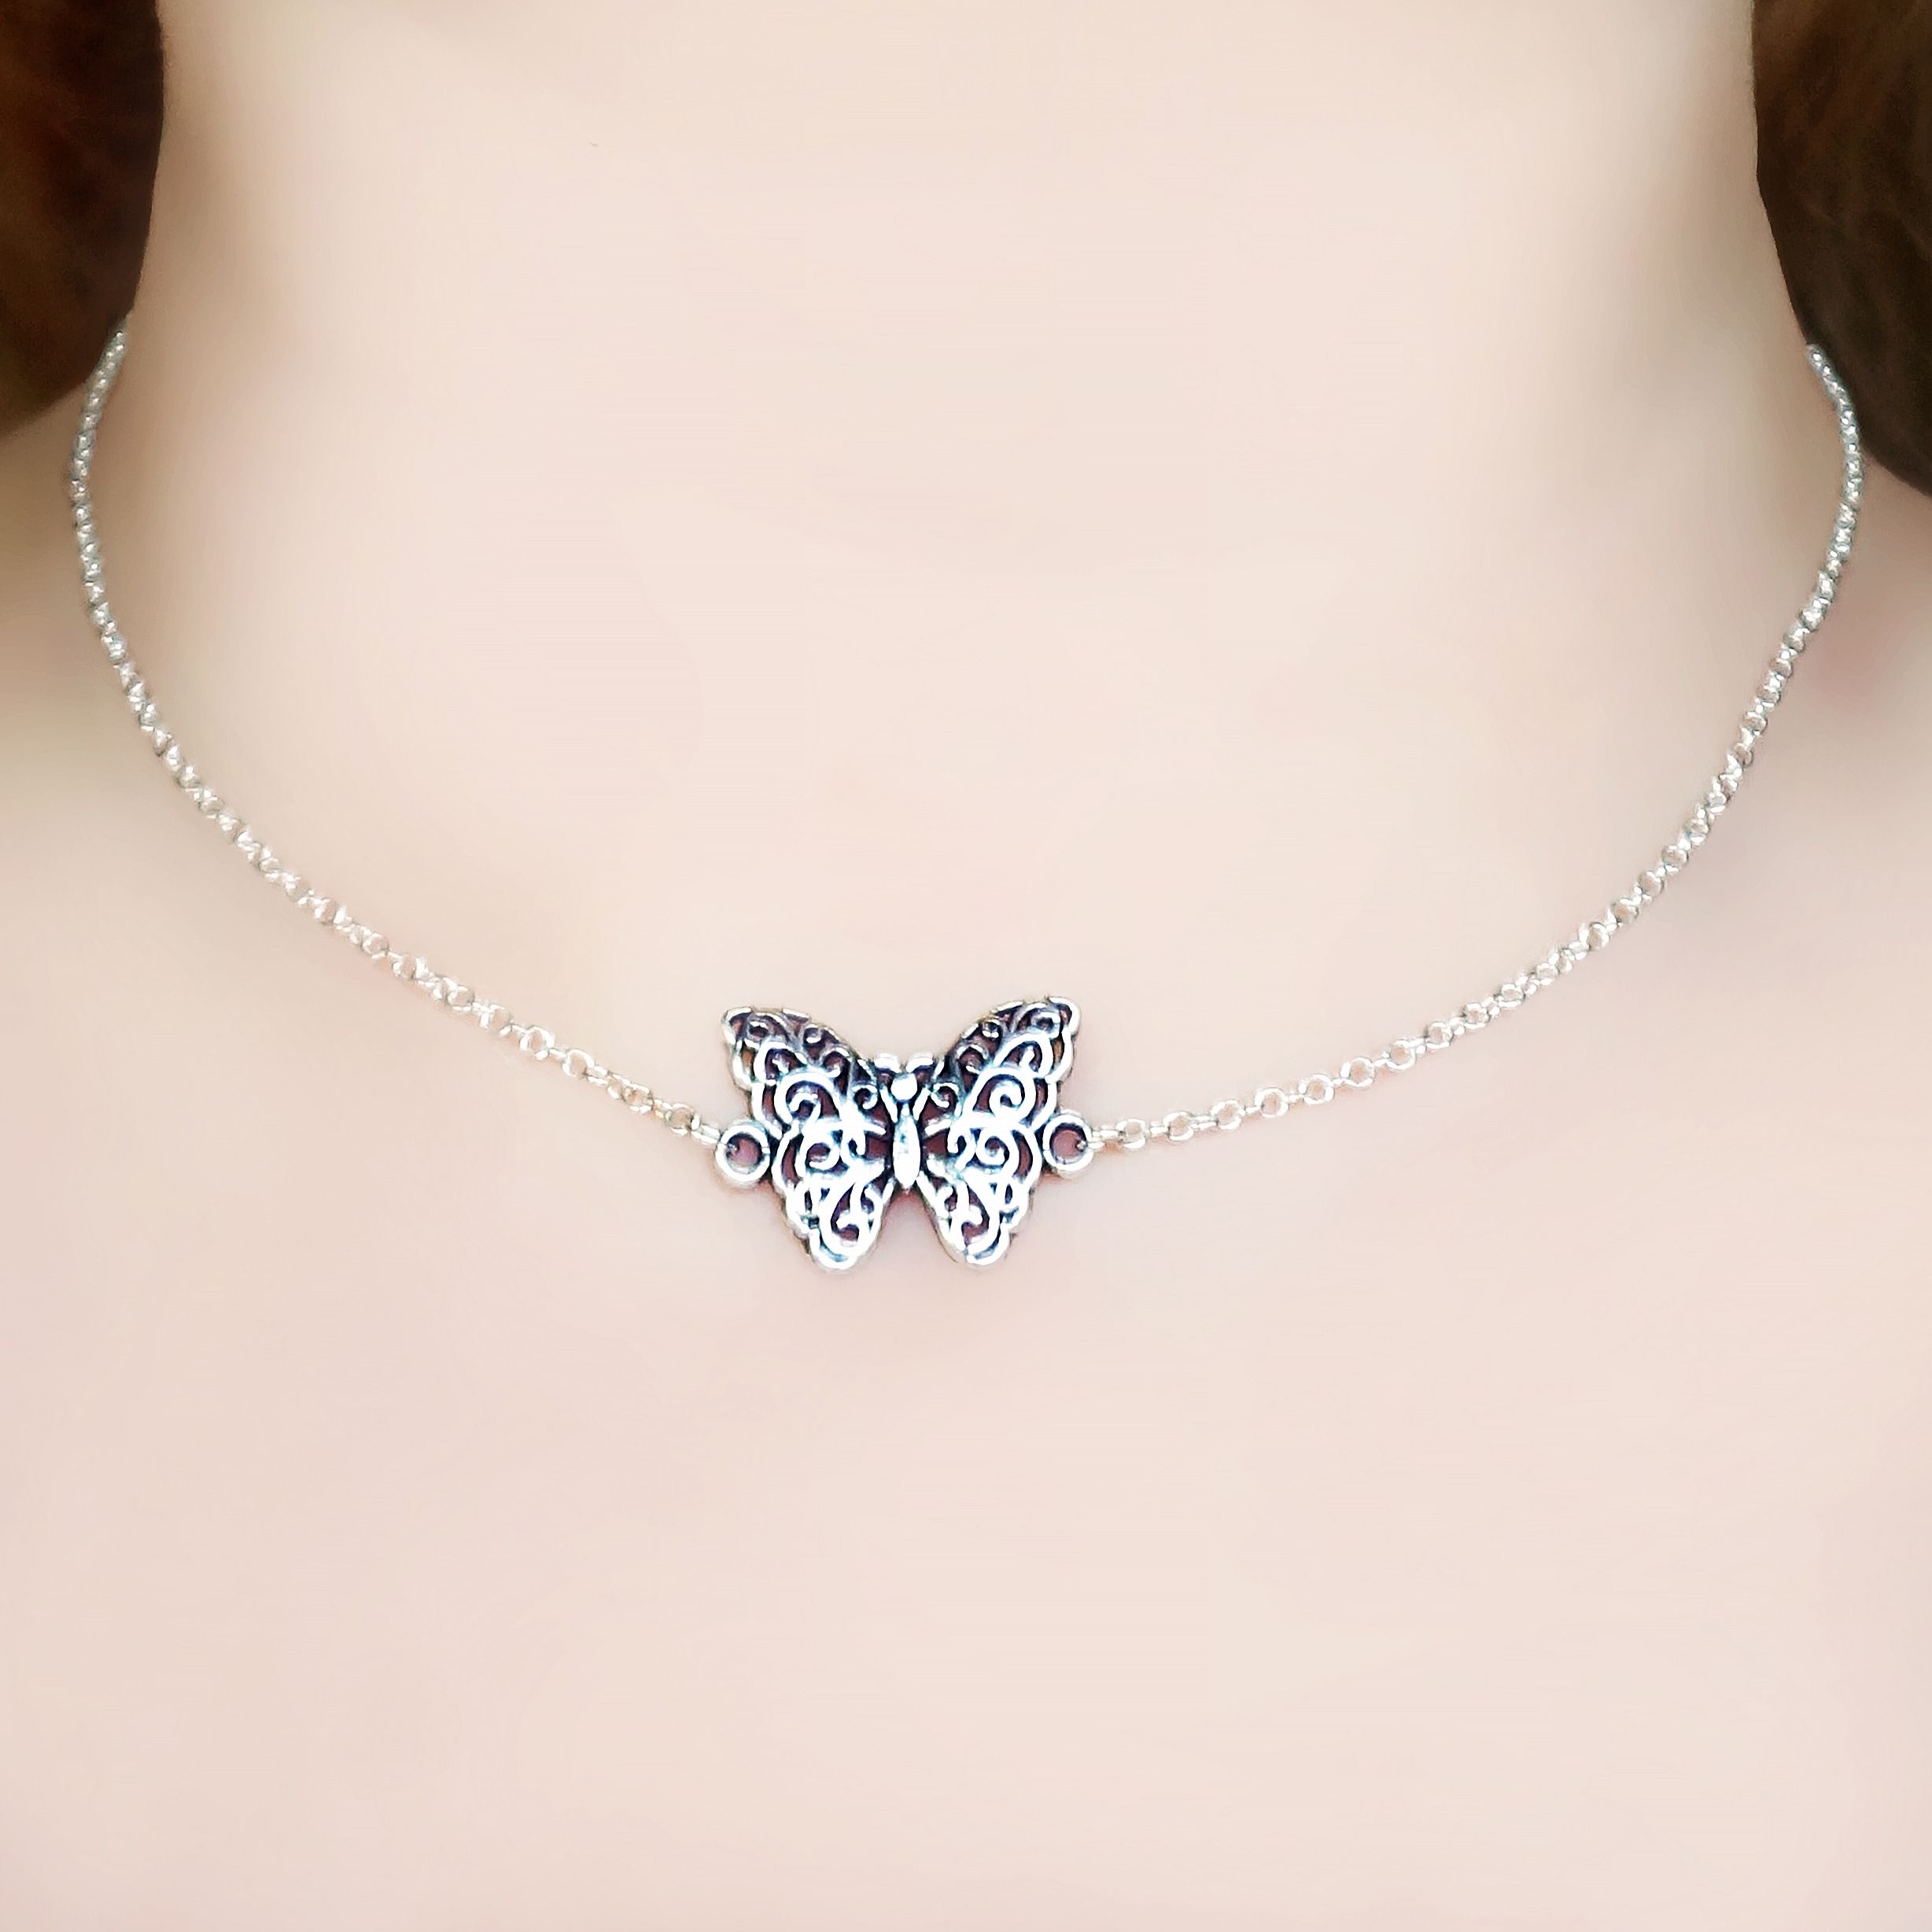 Necklace Details about   Petite Butterfly Weave Chainmaille Day Collar 